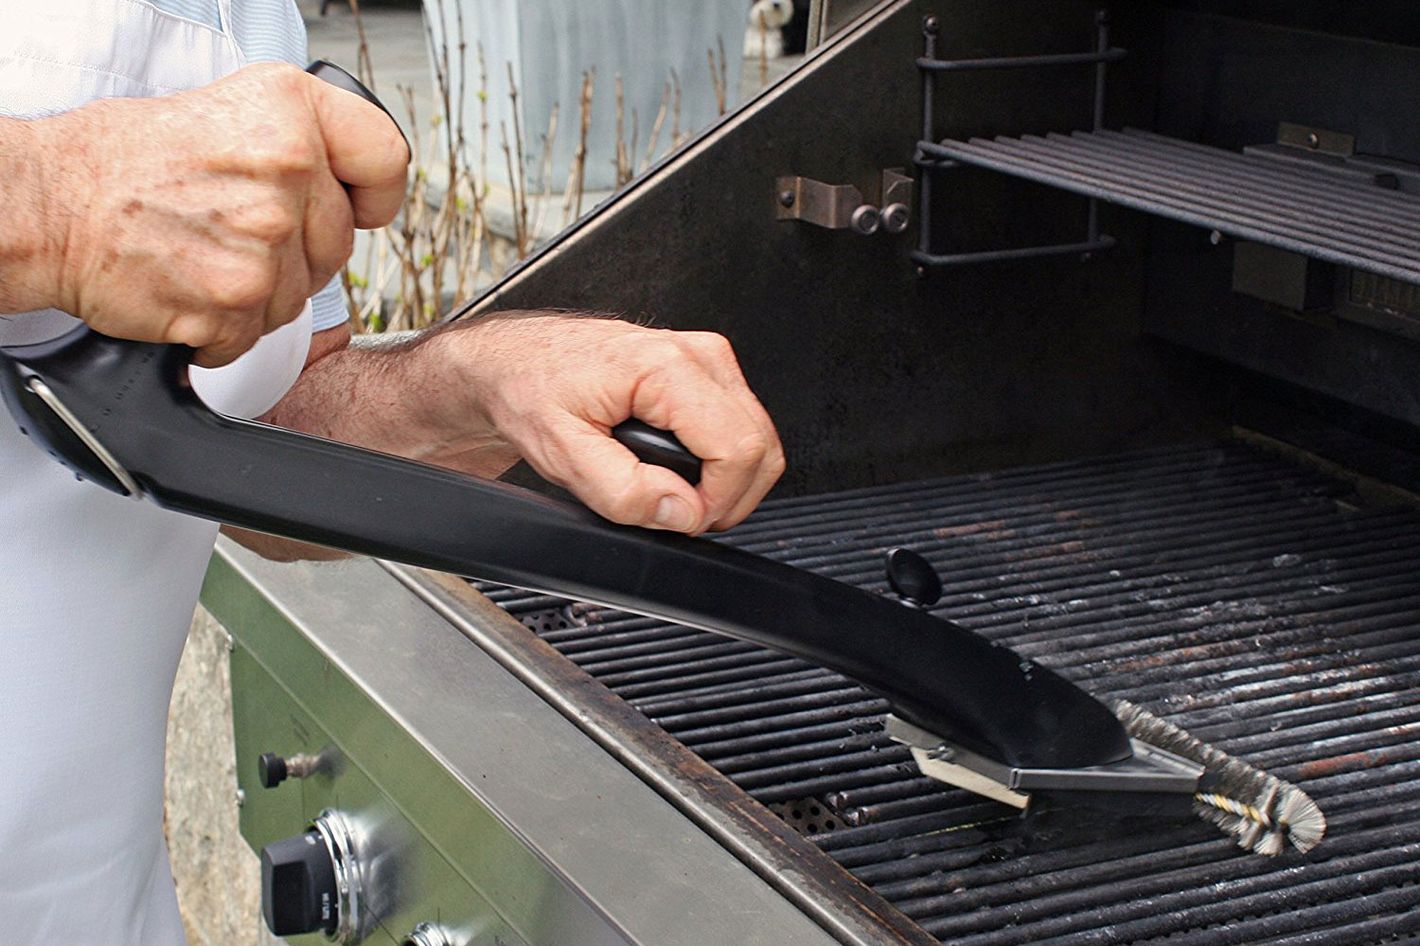 11 Best BBQ Tools for 2018 - Grilling Accessories for Your Next